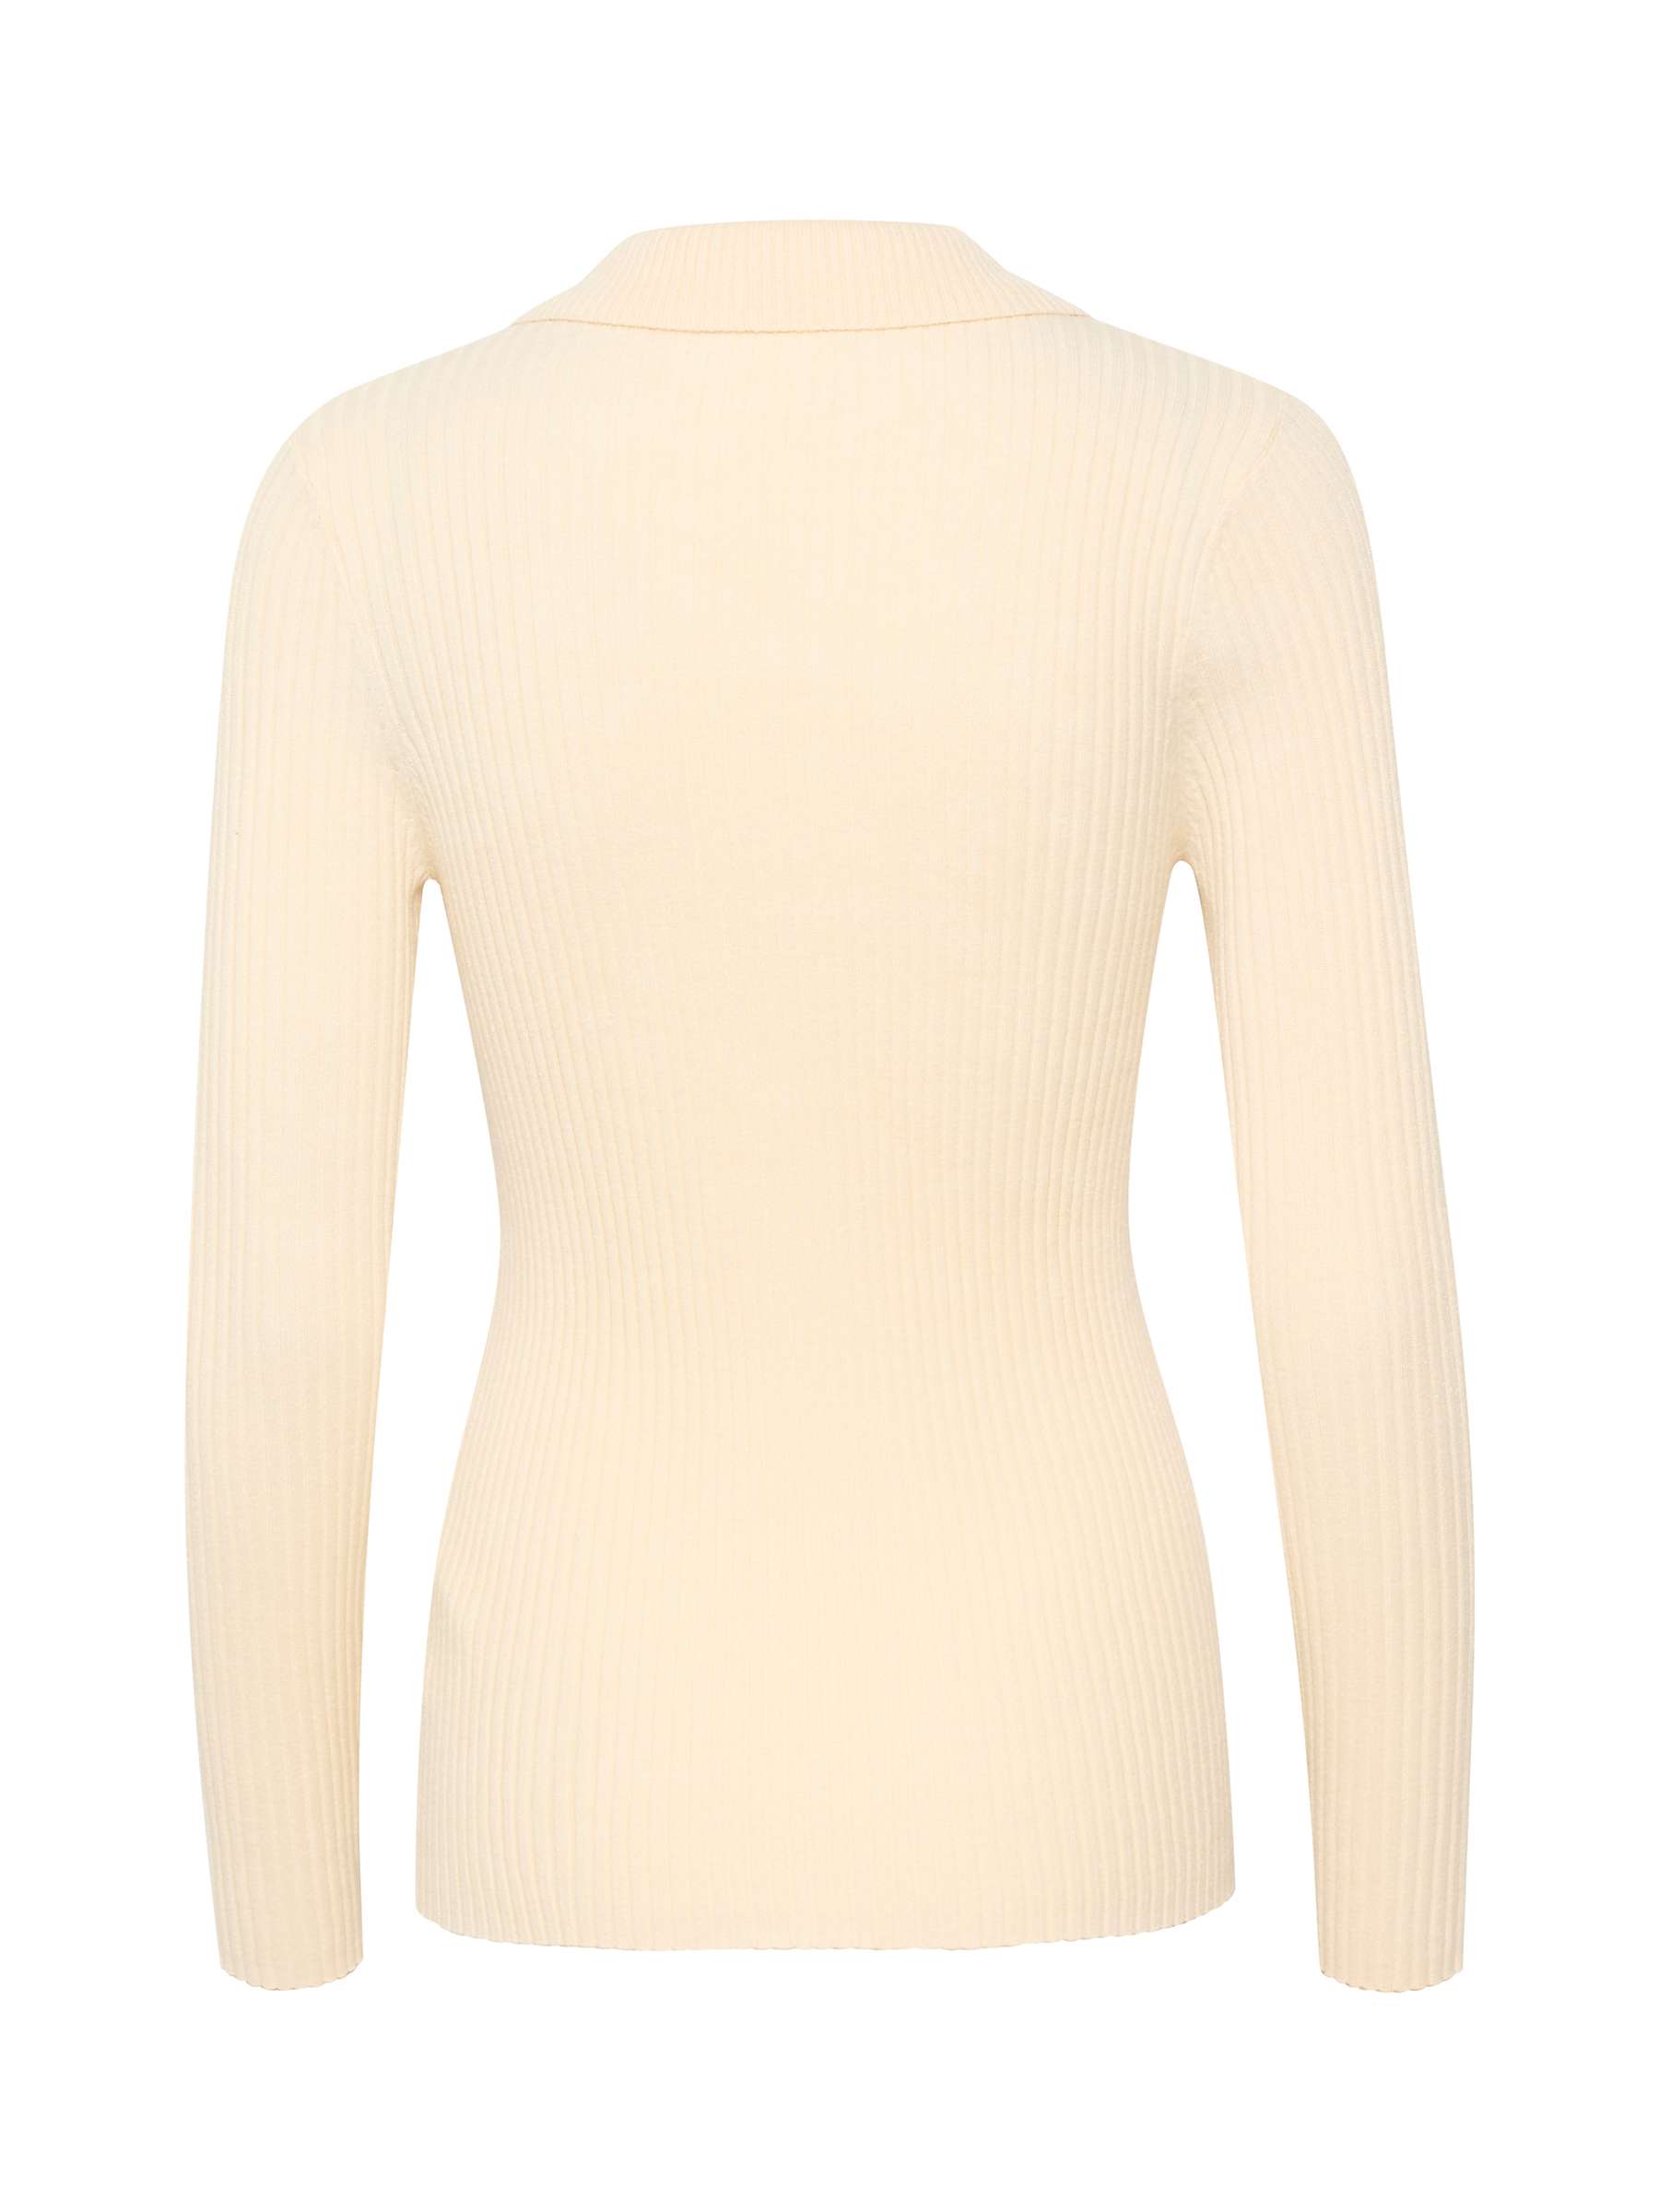 Buy Part Two Feride Rib Knit Collared Top, Cream Online at johnlewis.com